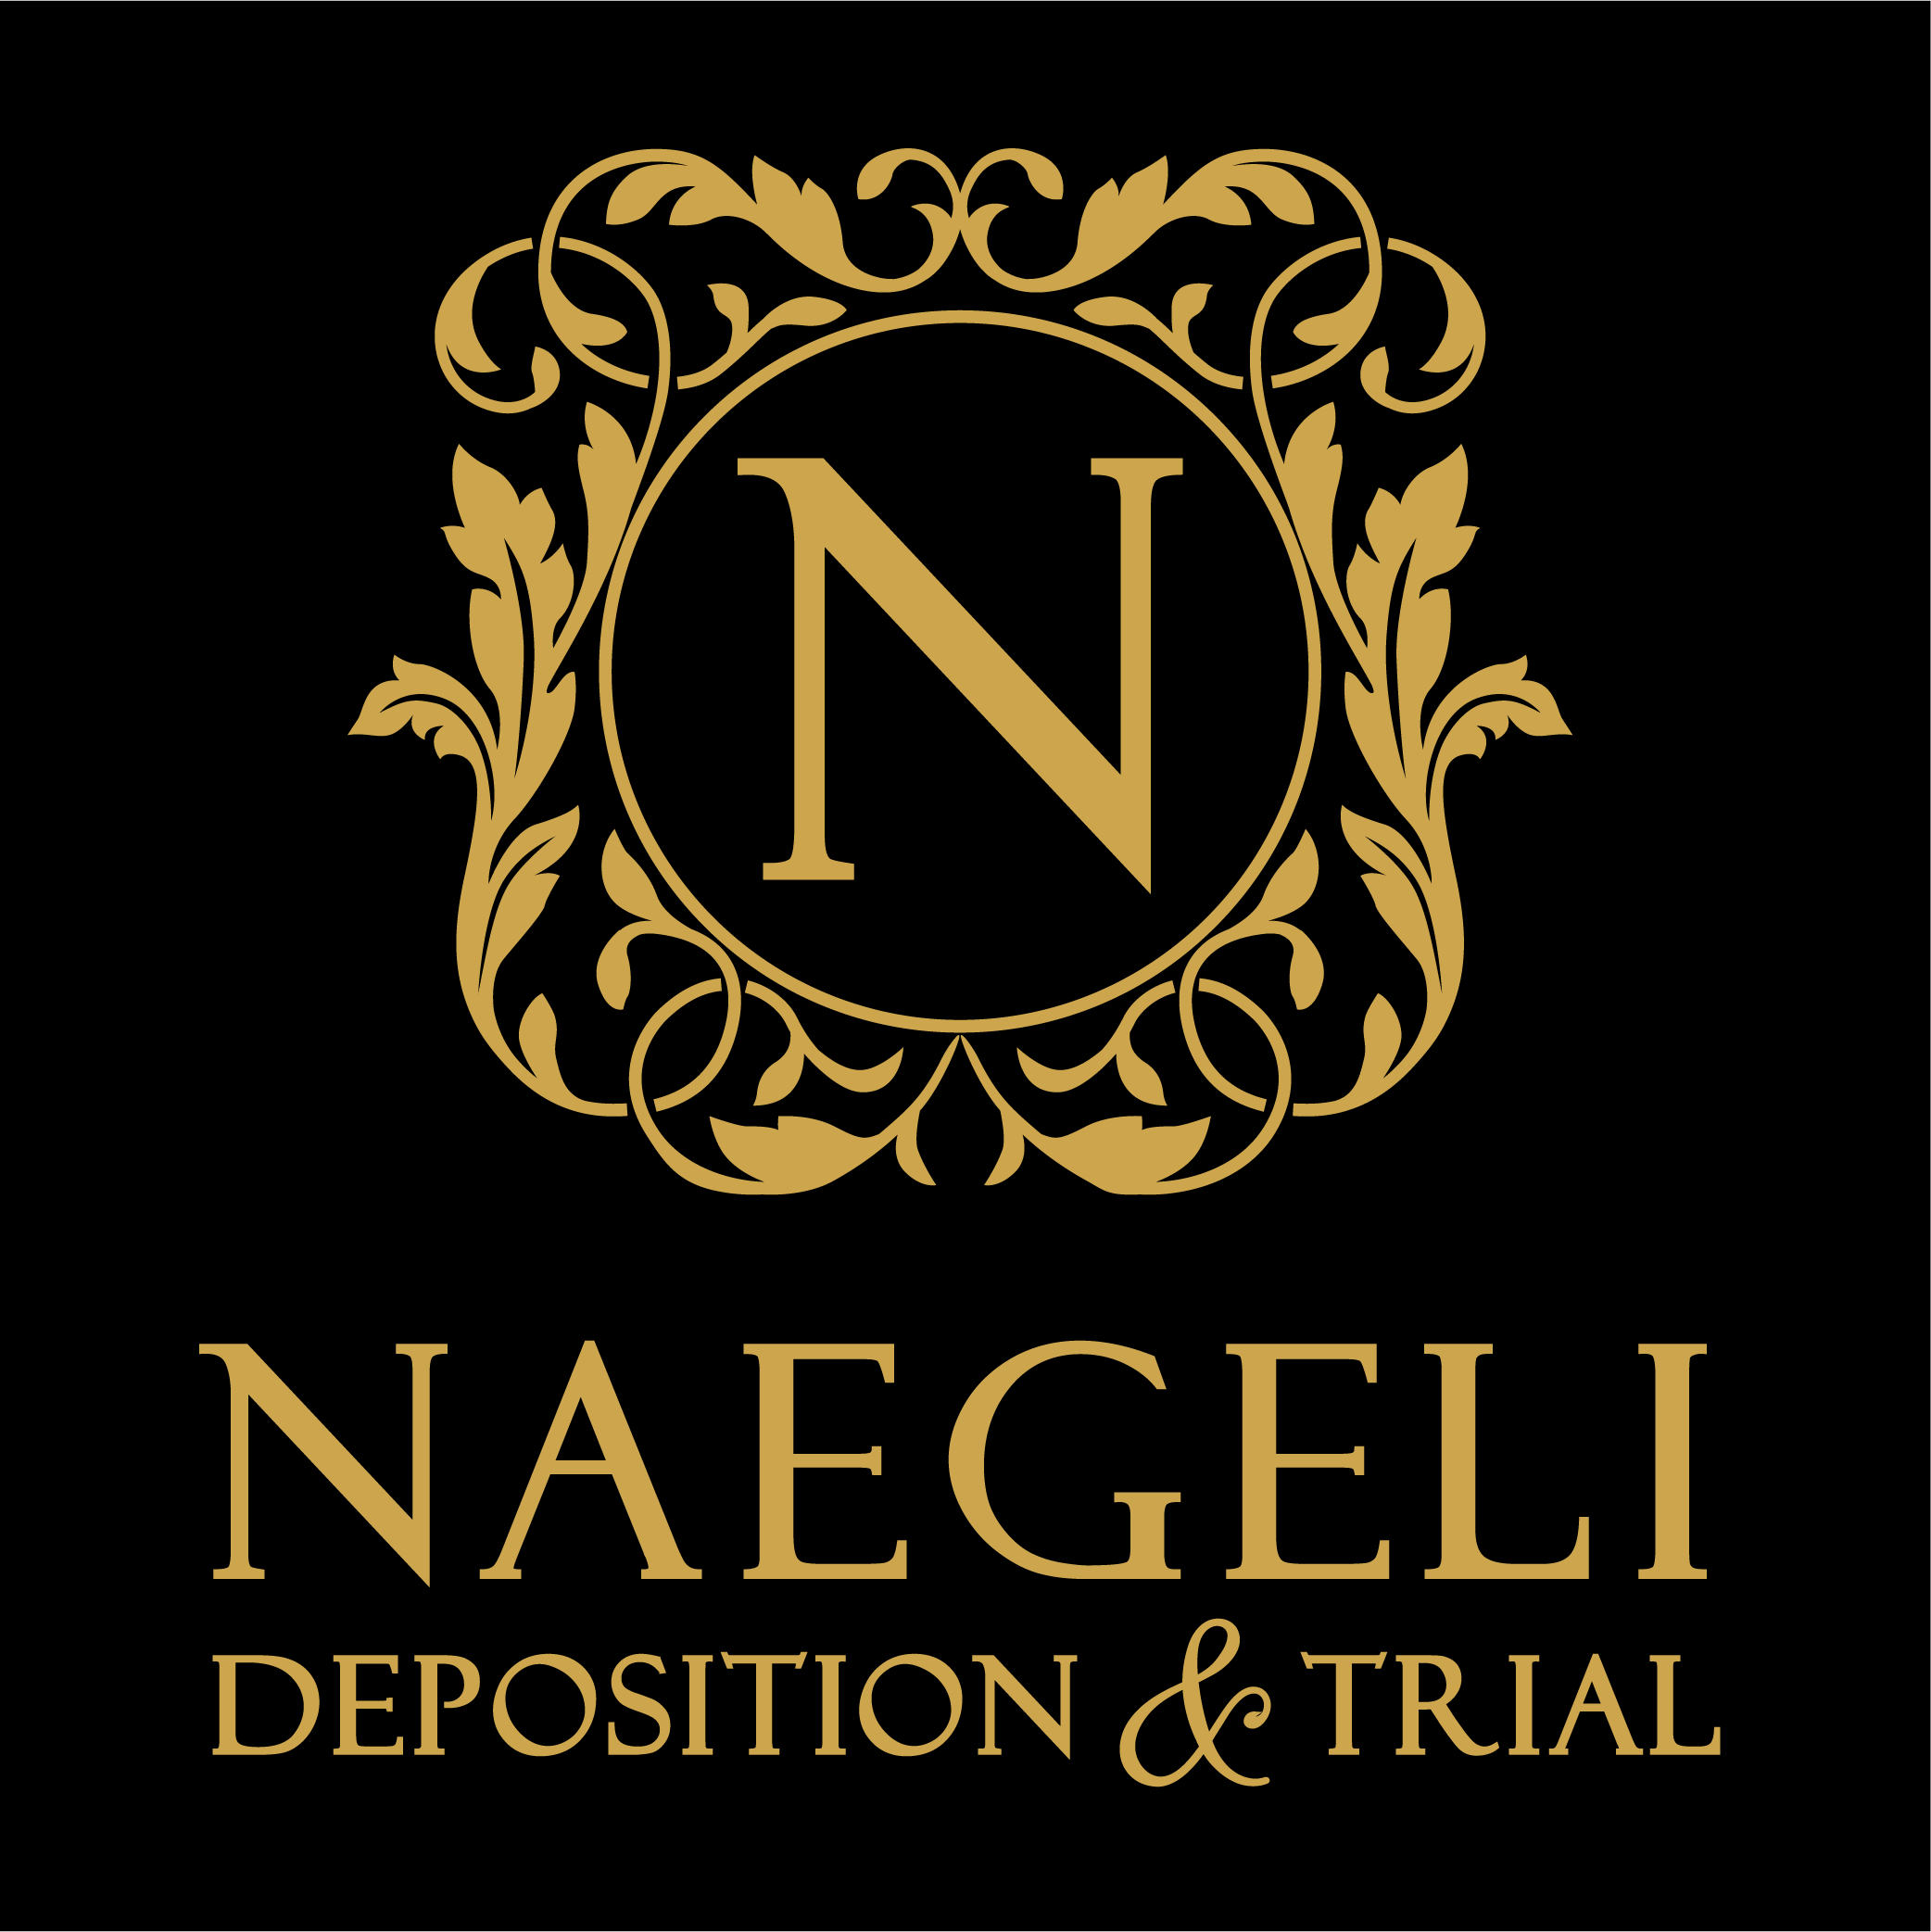 Naegeli Deposition & Trial